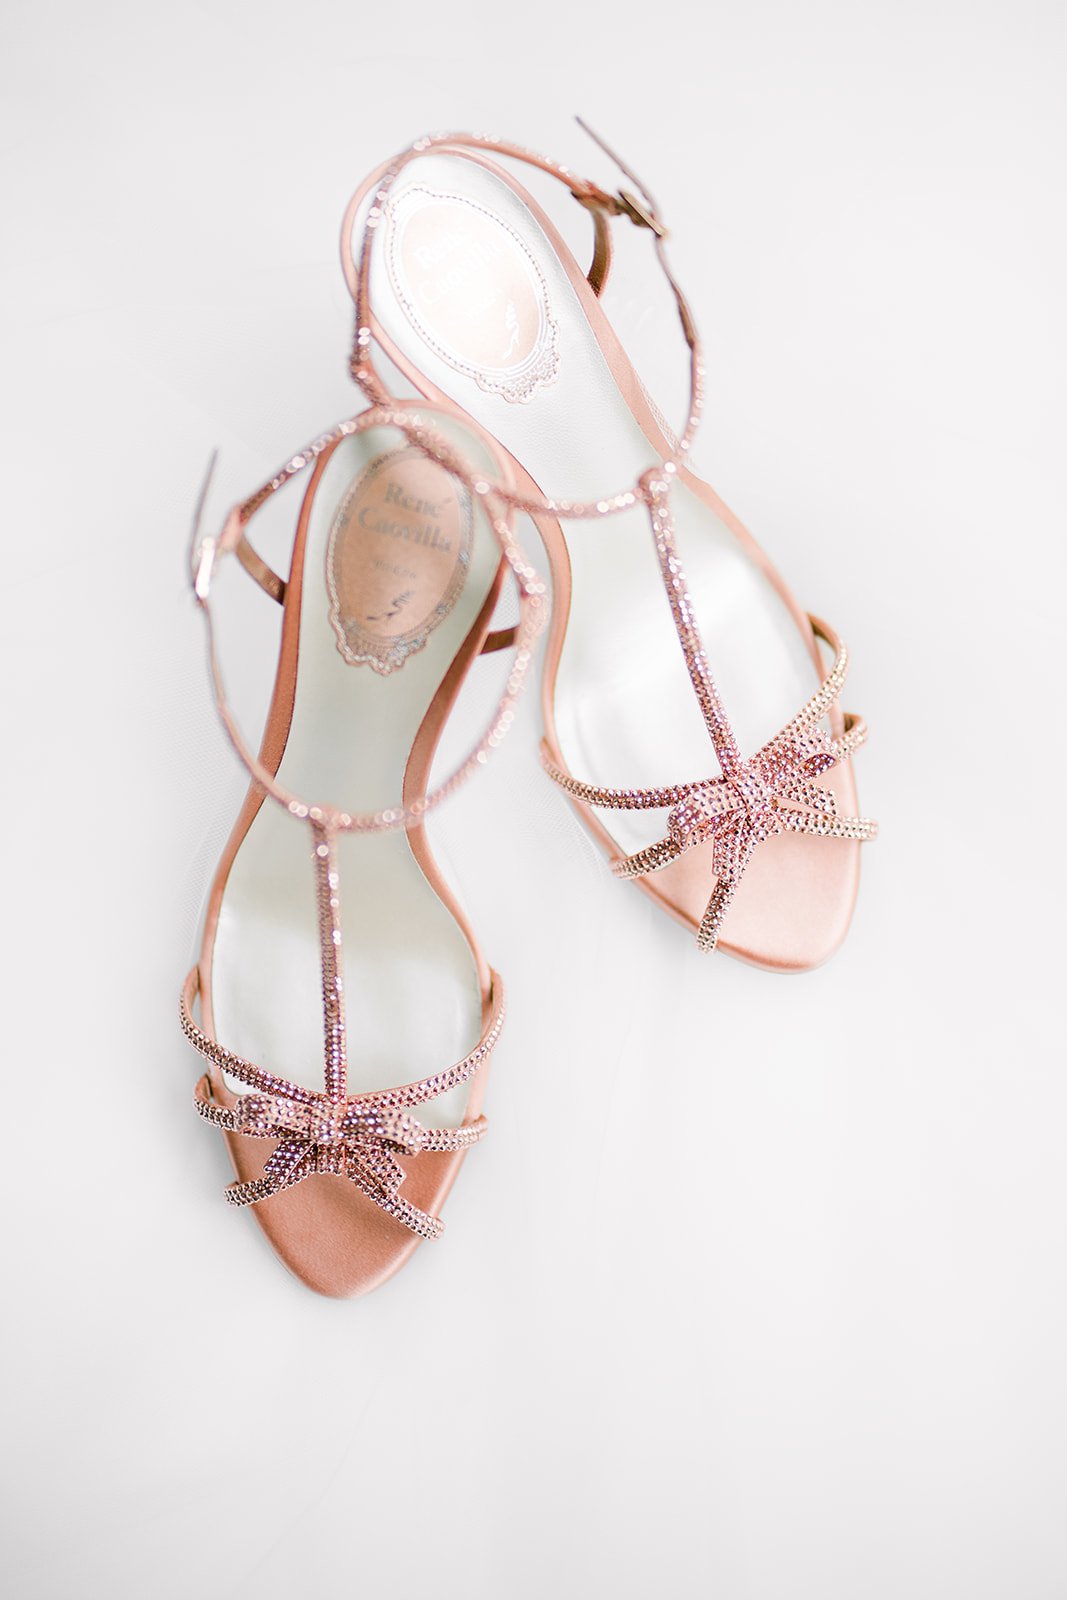 rene caovilla bridal shoes with pink jewel encrusted bows stand on white background for vancouver wedding